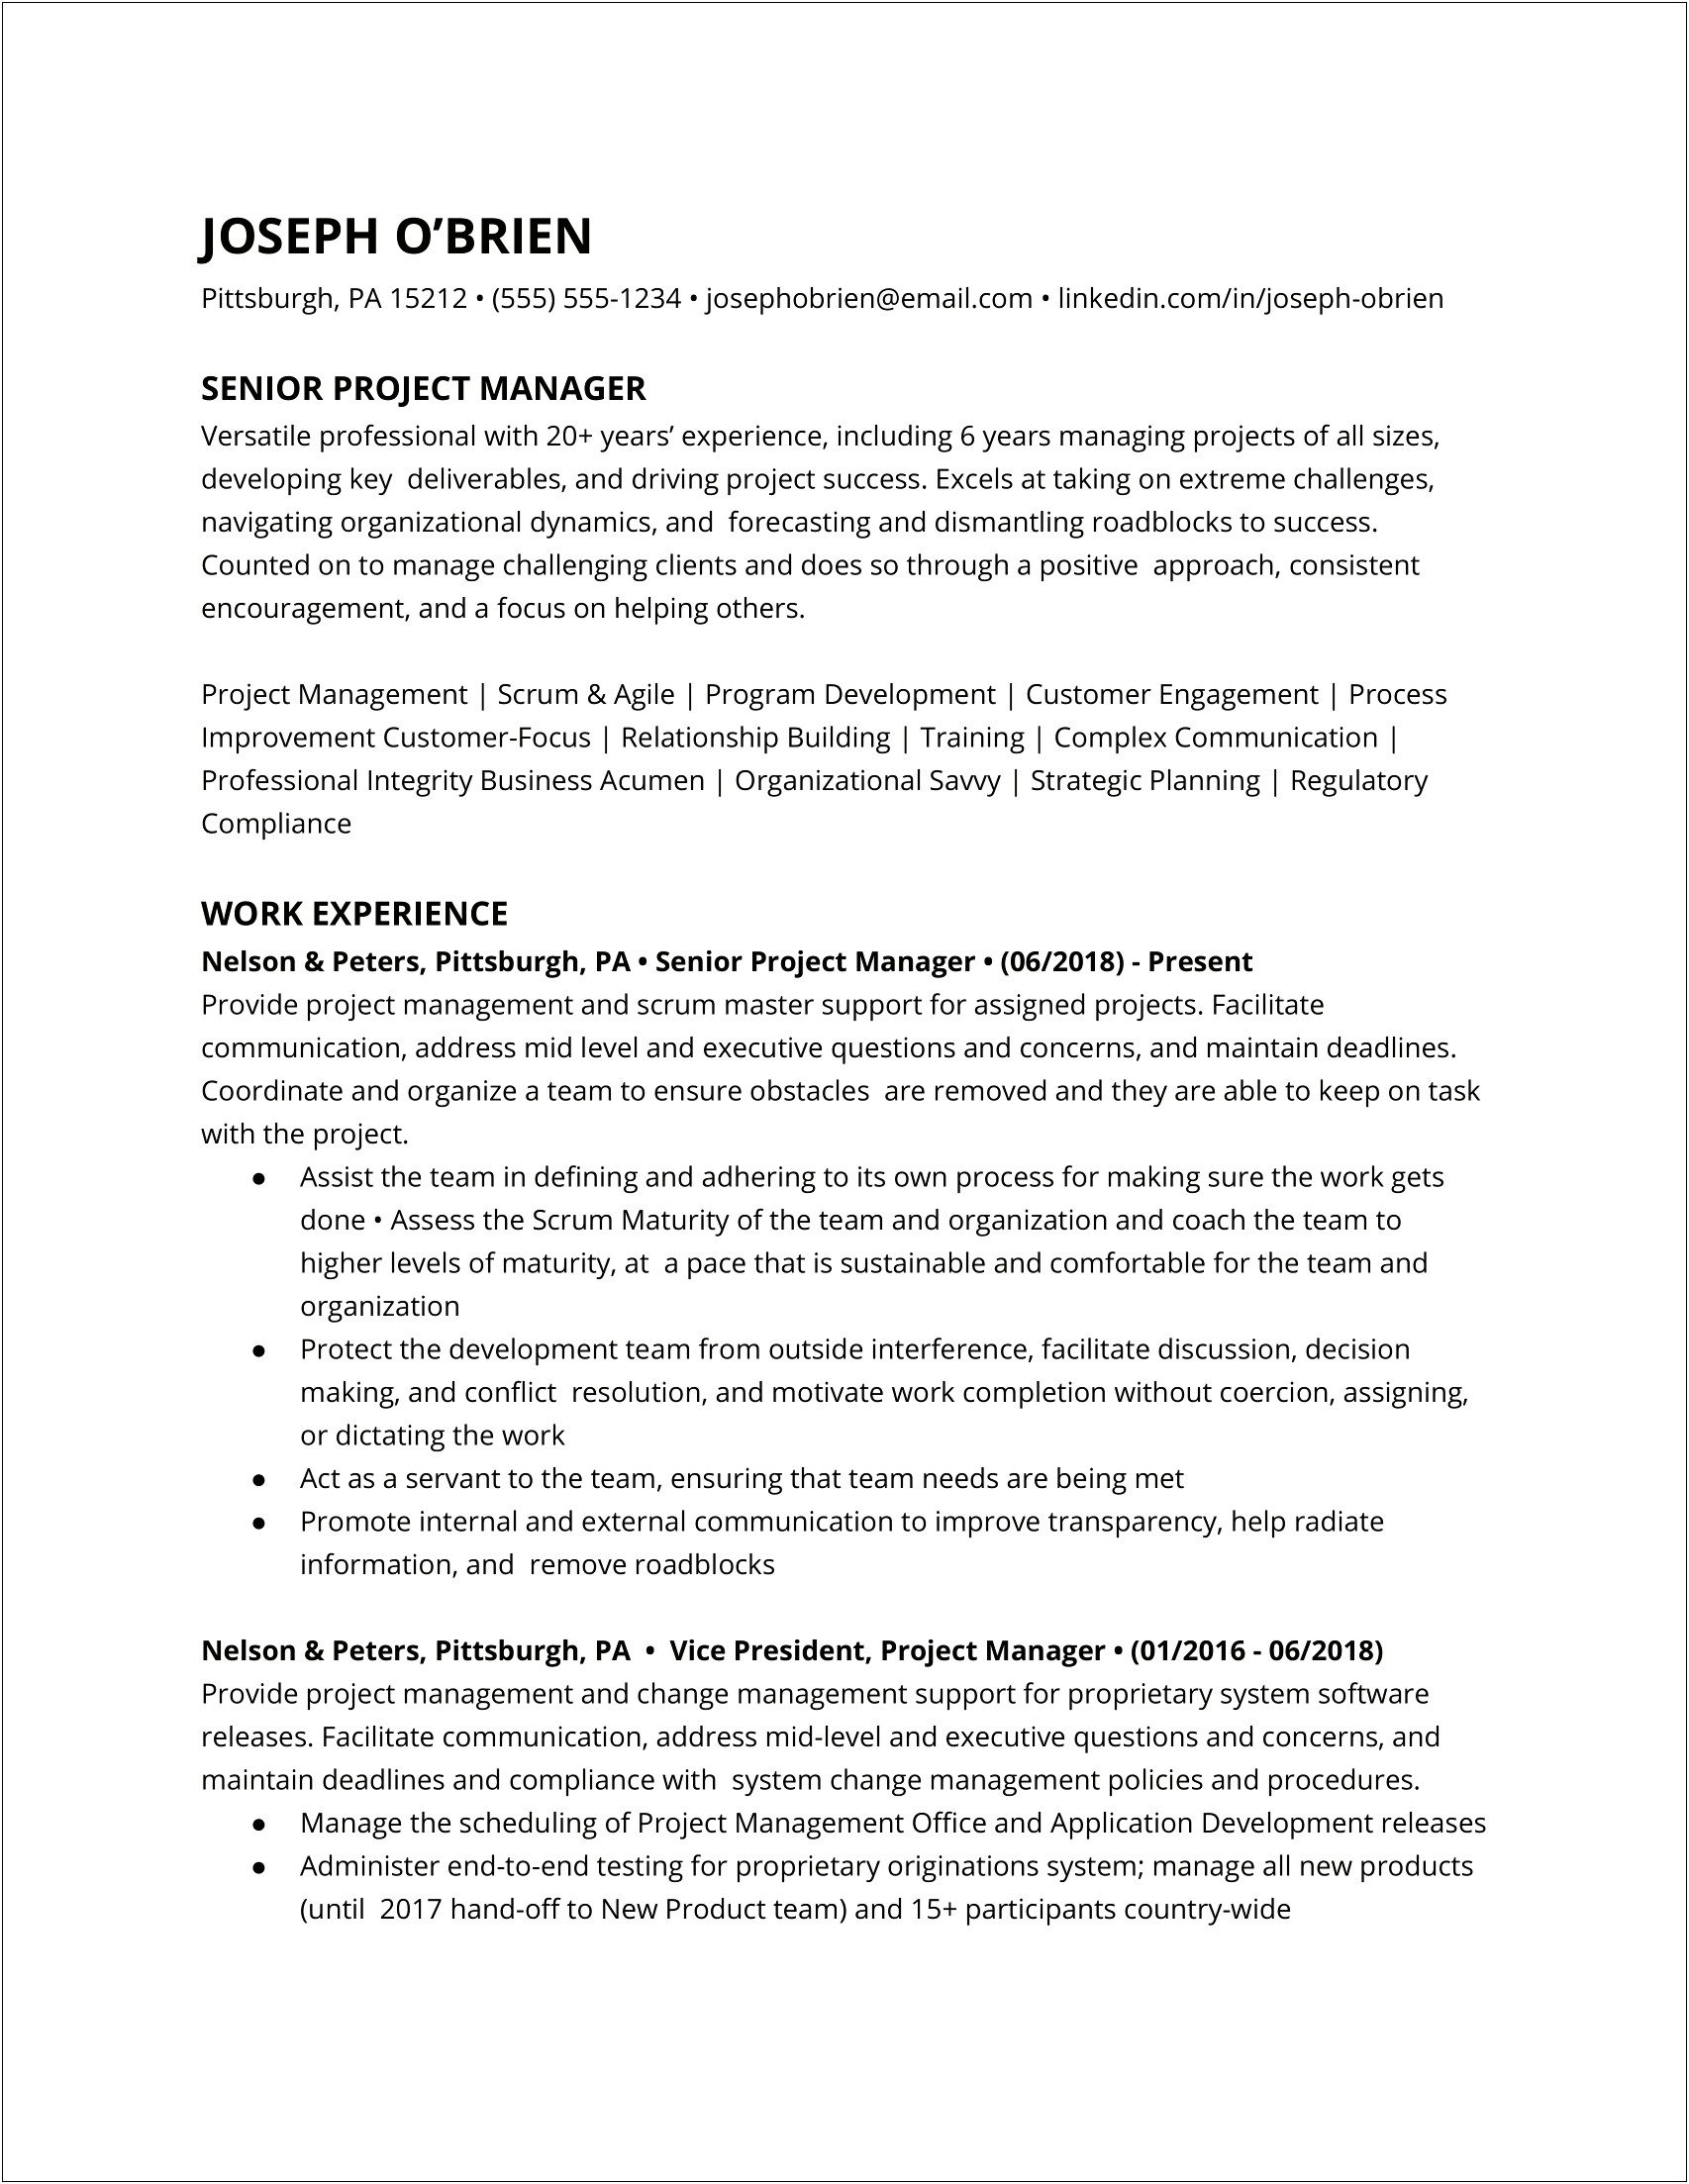 Technical Project Manager Role Resume